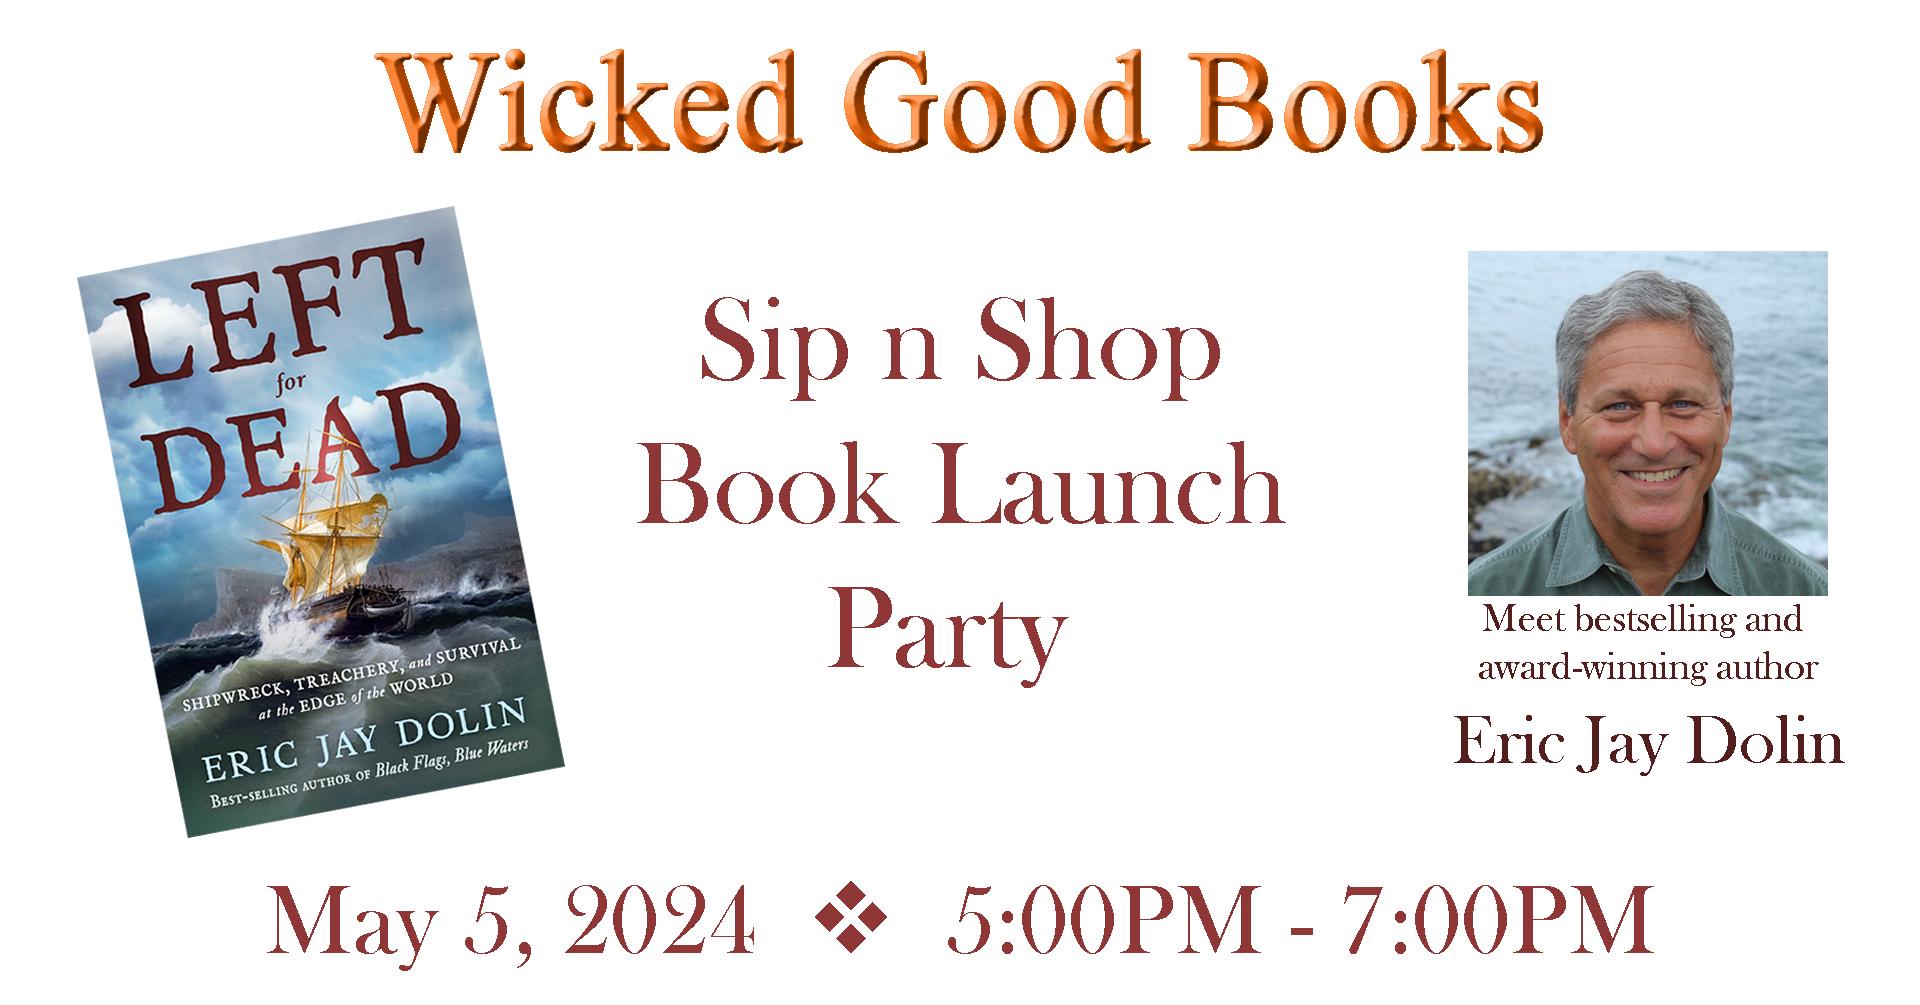 Join us for a fun-filled book launch event at Wicked Good Books on May 5, 2024, from 5:00 pm to 7:00 pm. Don't miss this chance to meet Eric Jay Dolin, an acclaimed author whose books have topped bestseller lists. This is your perfect opportunity for a delightful literary evening!